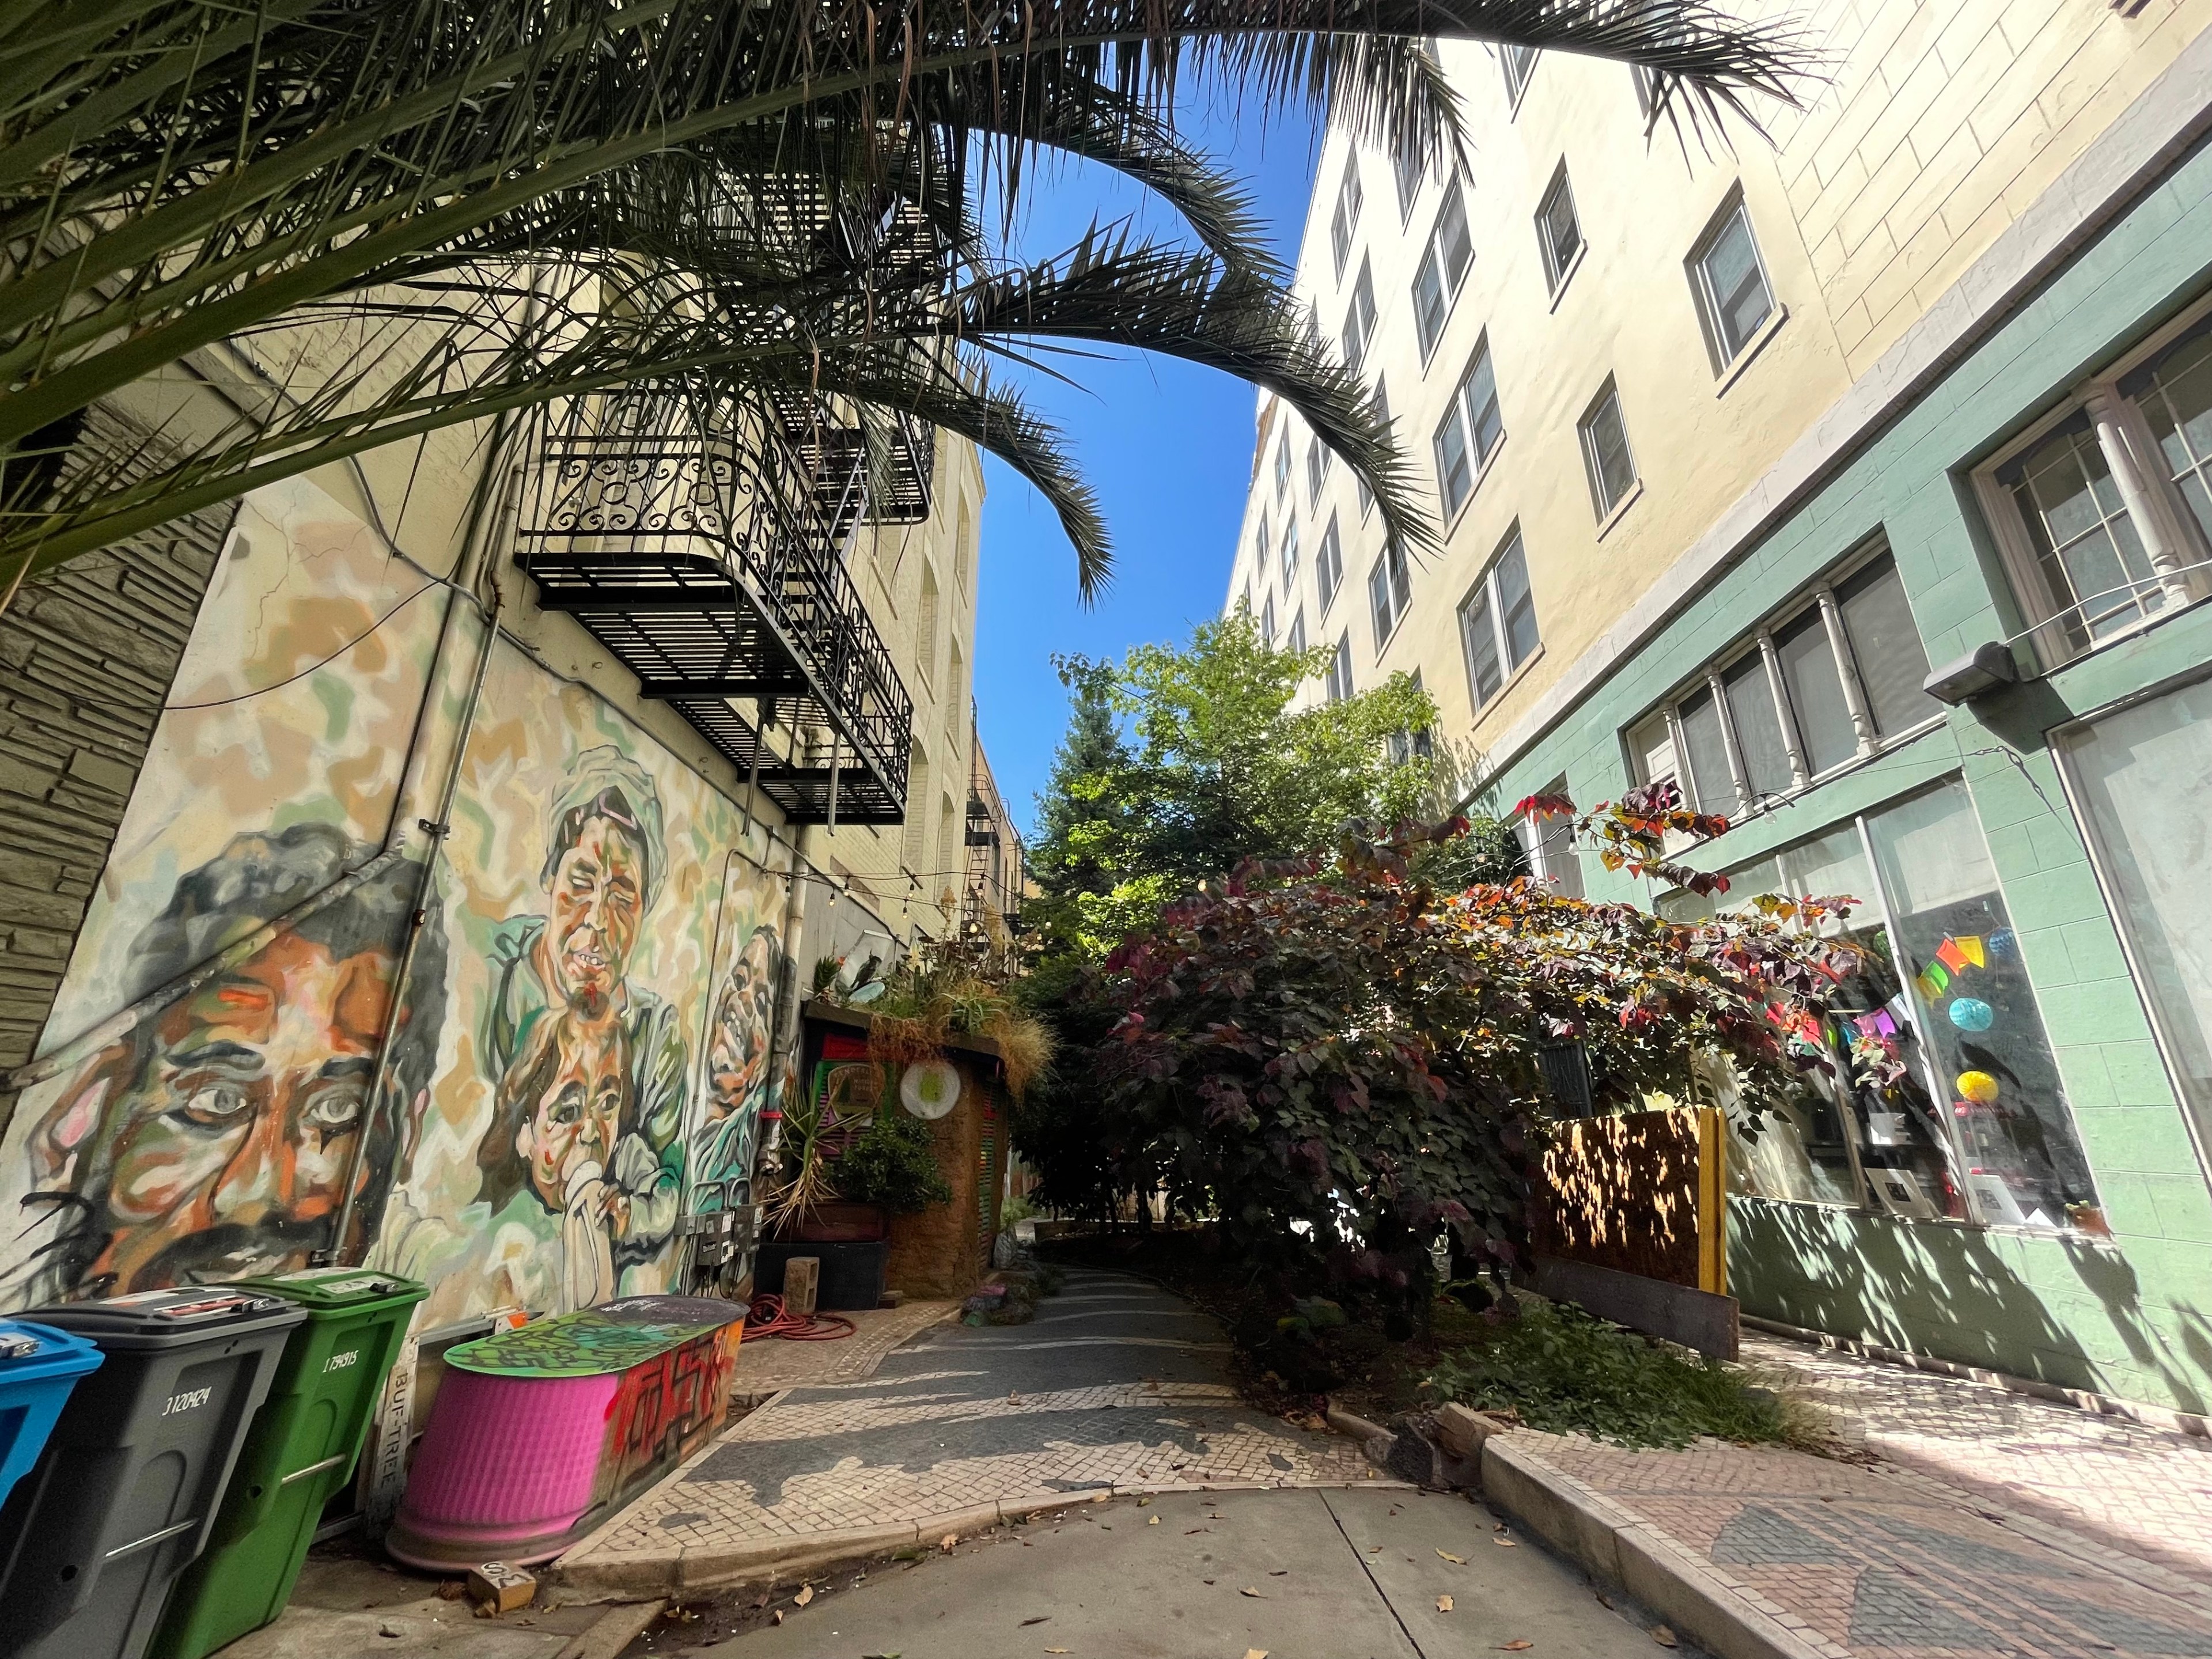 San Francisco To Reopen Tree-Filled Art Oasis in Troubled Neighborhood